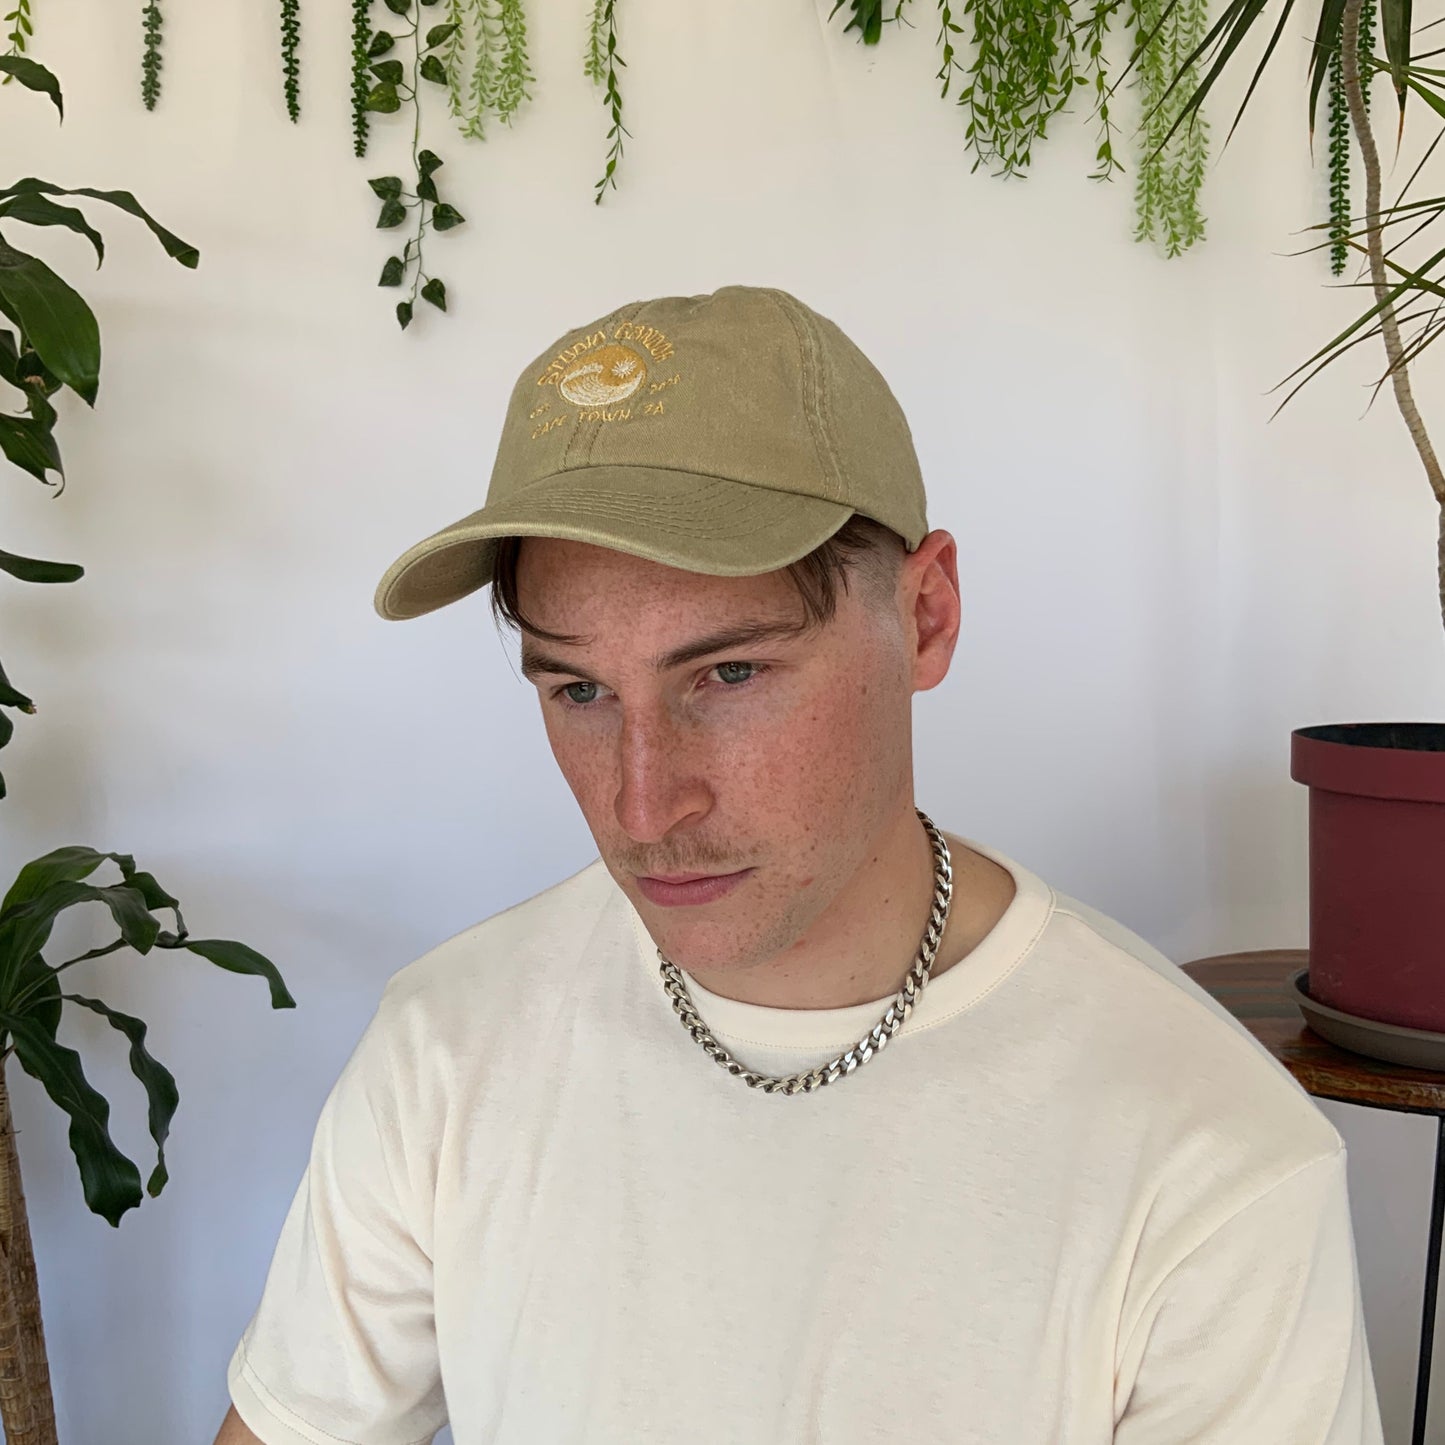 Model wears a stone coloured peak cap with a cream t-shirt and silver necklace. Model sits against a white backdrop with plants and hanging foliage.